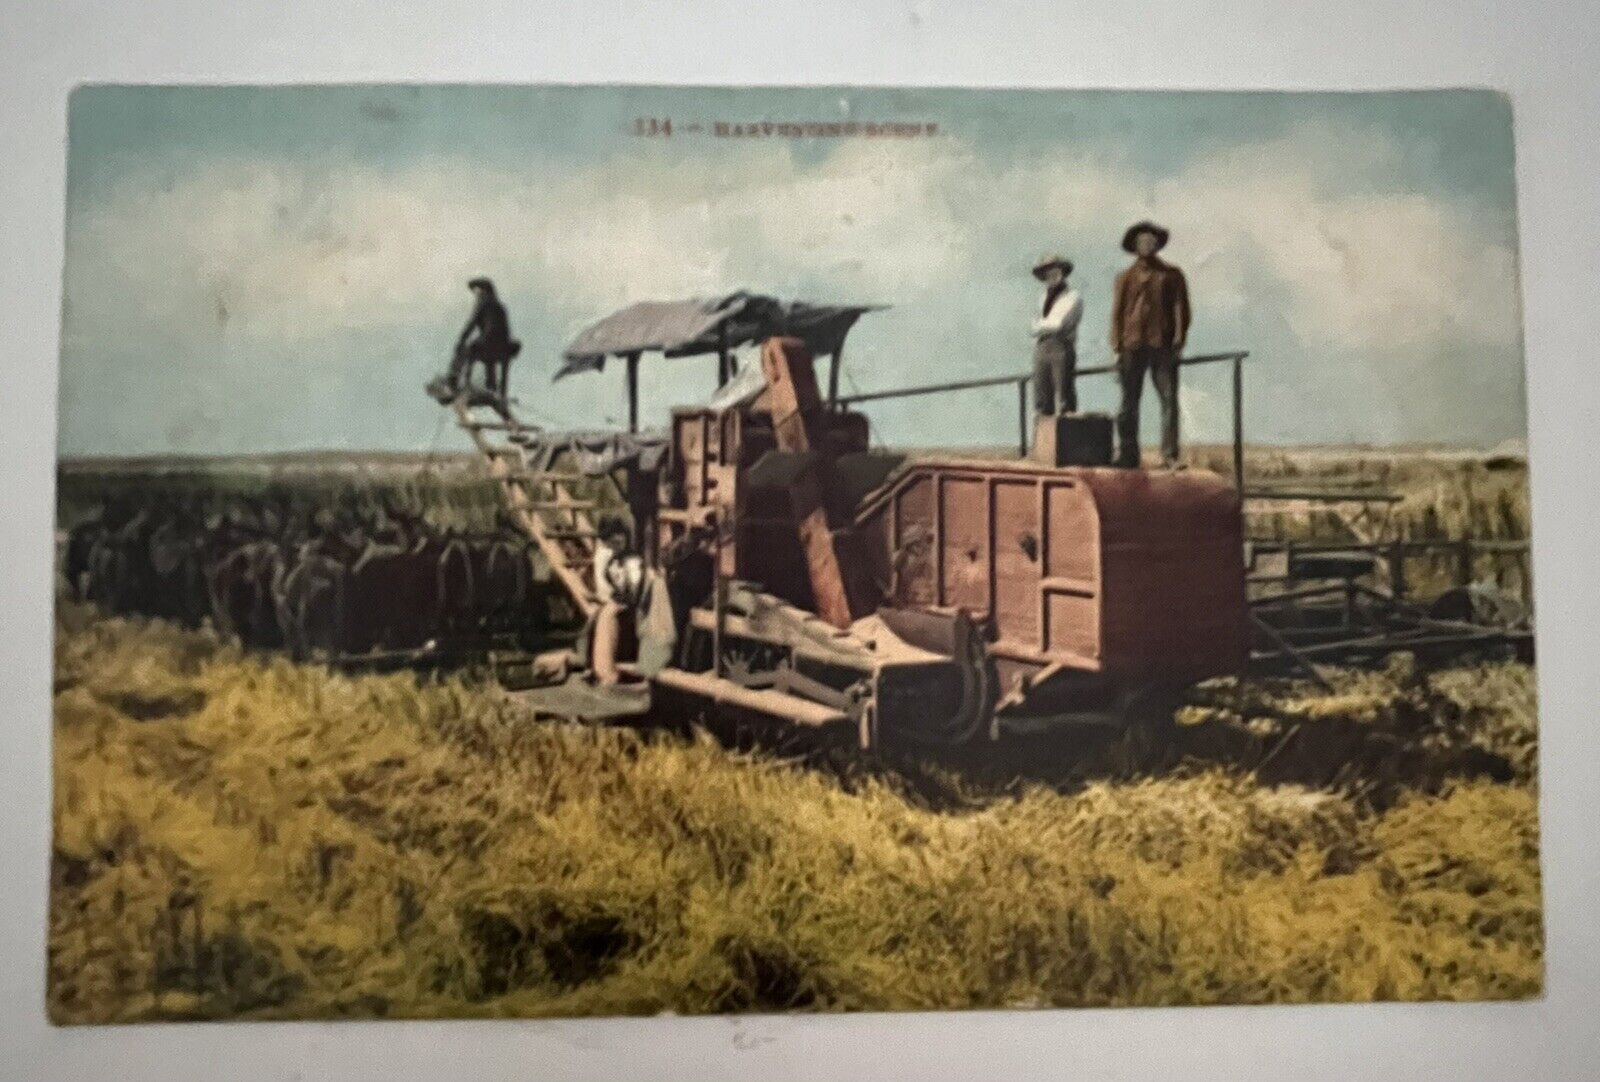 Postcard Antique HARVESTING SCENE Edward H Mitchell SAN FRANCISCO Ca with Note